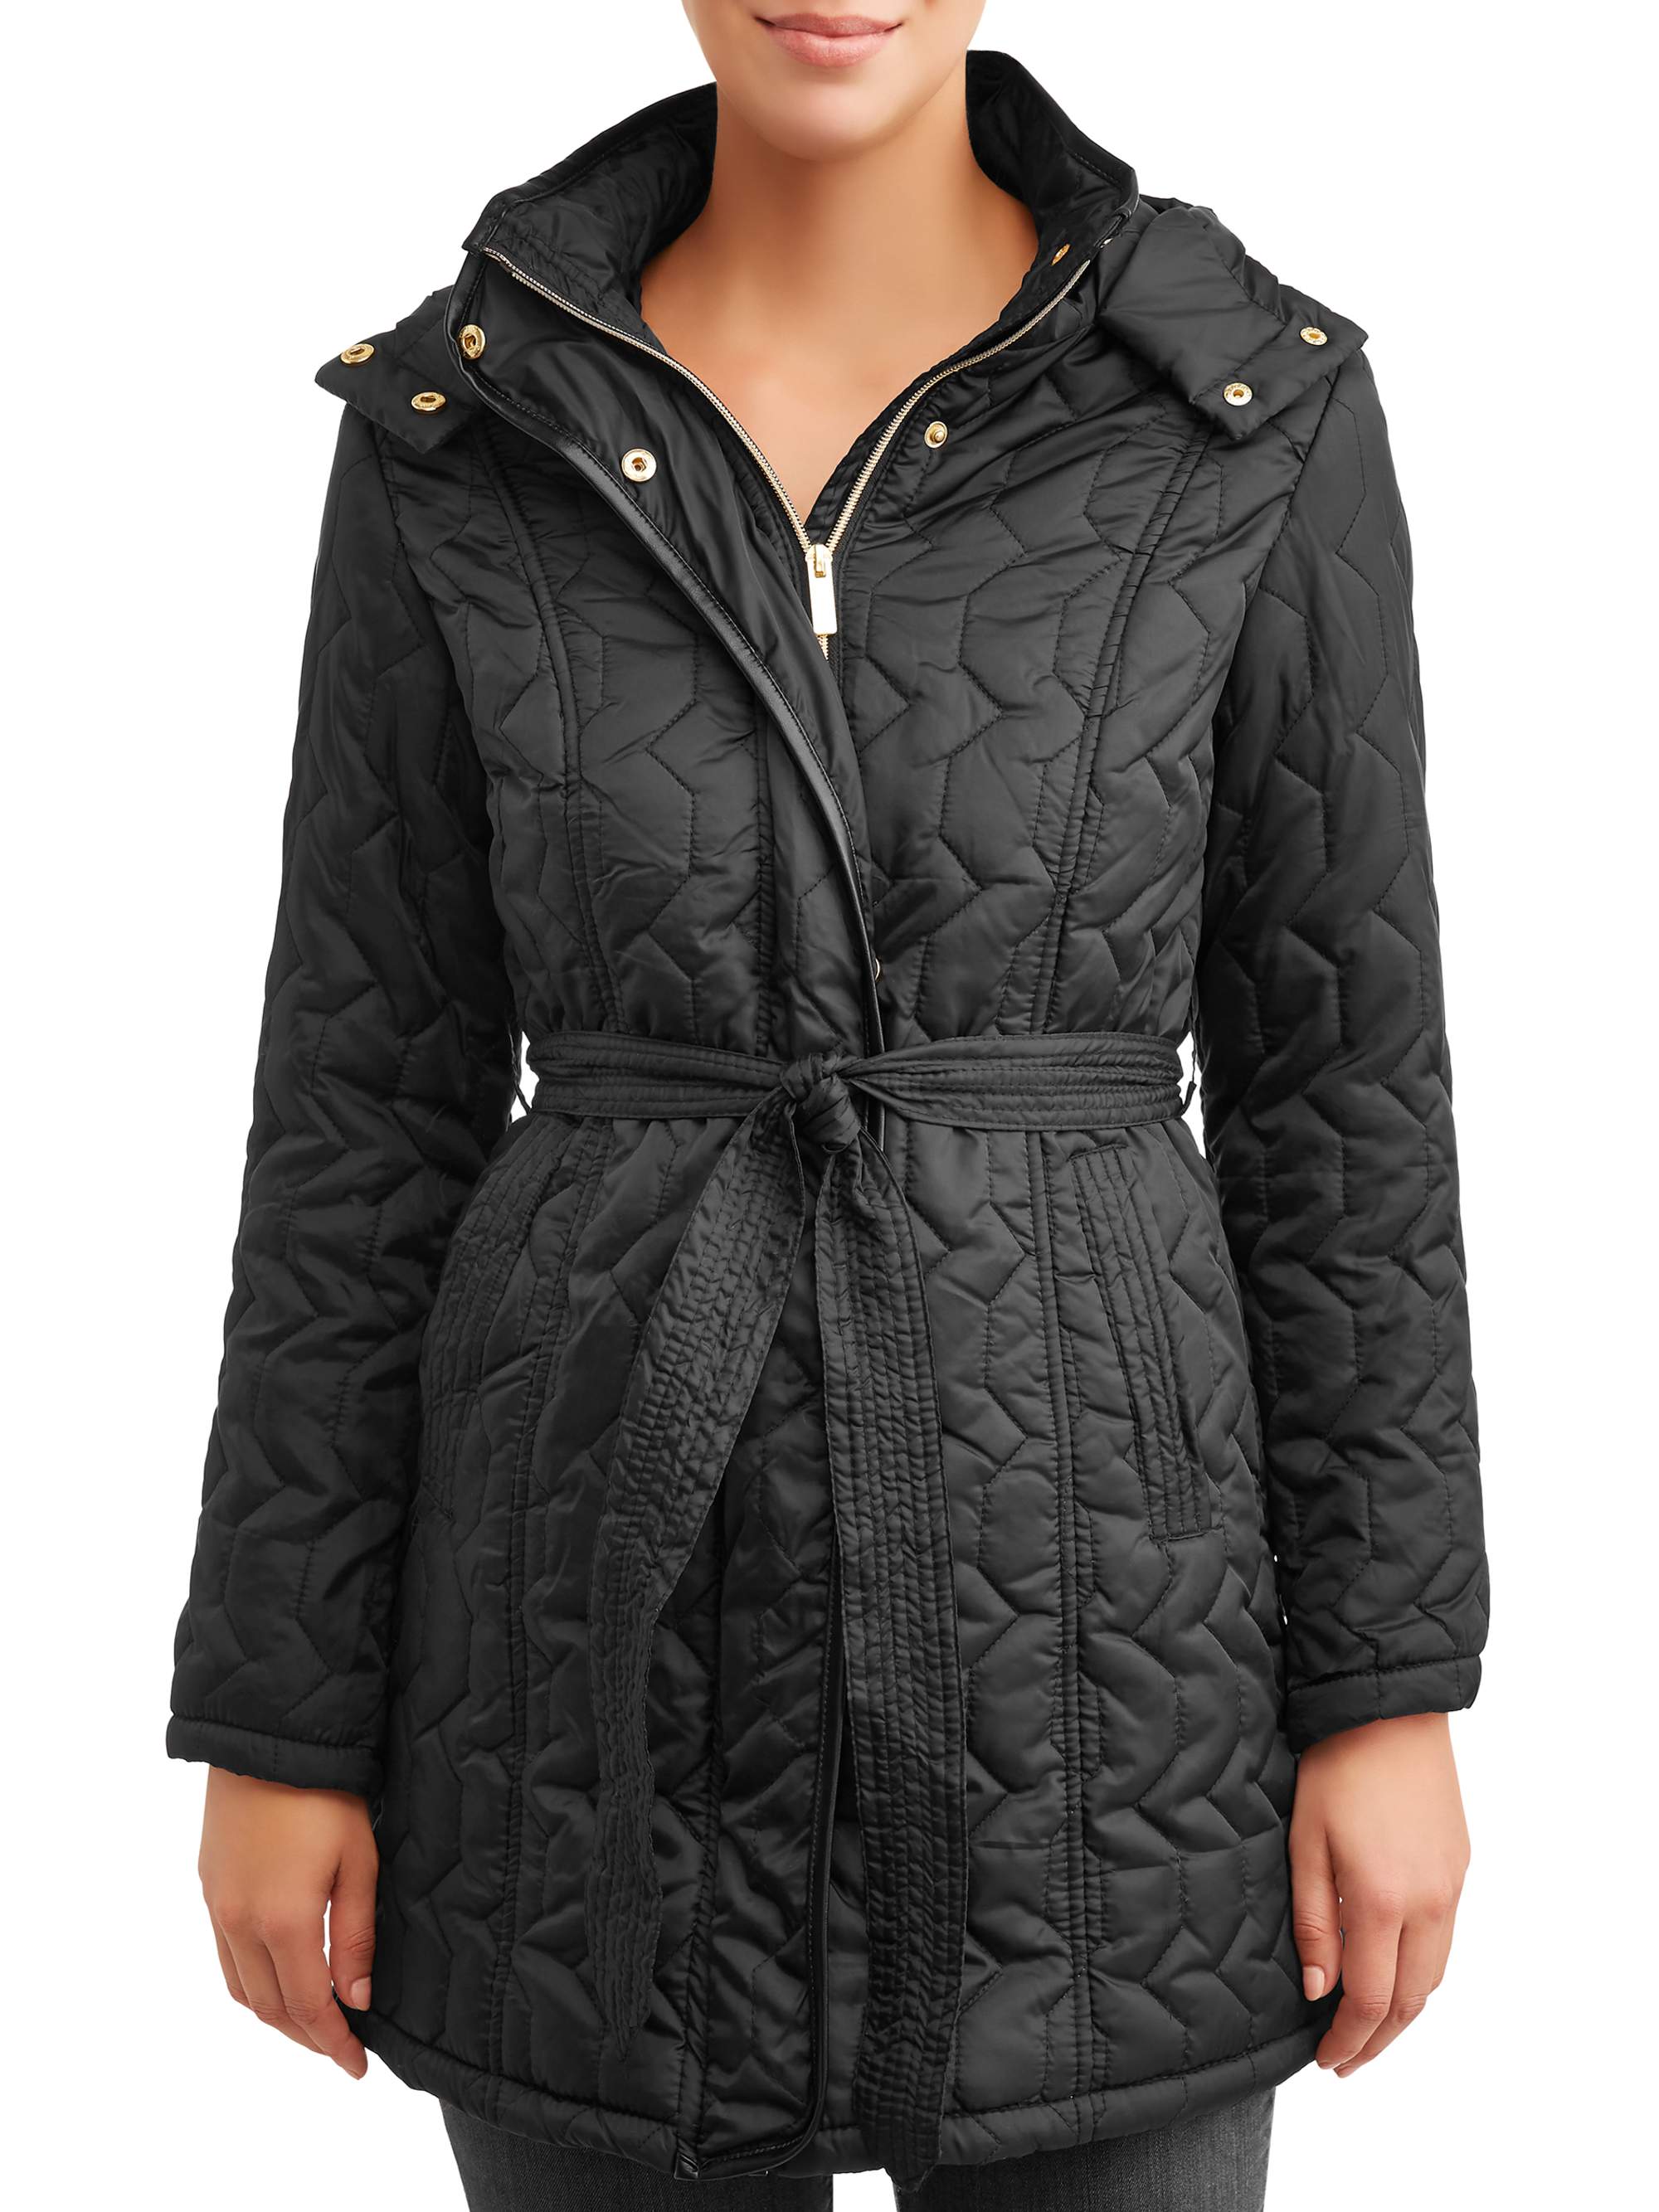 Big Chill Women's Belted Zig-Zag Quilt Jacket - image 1 of 4